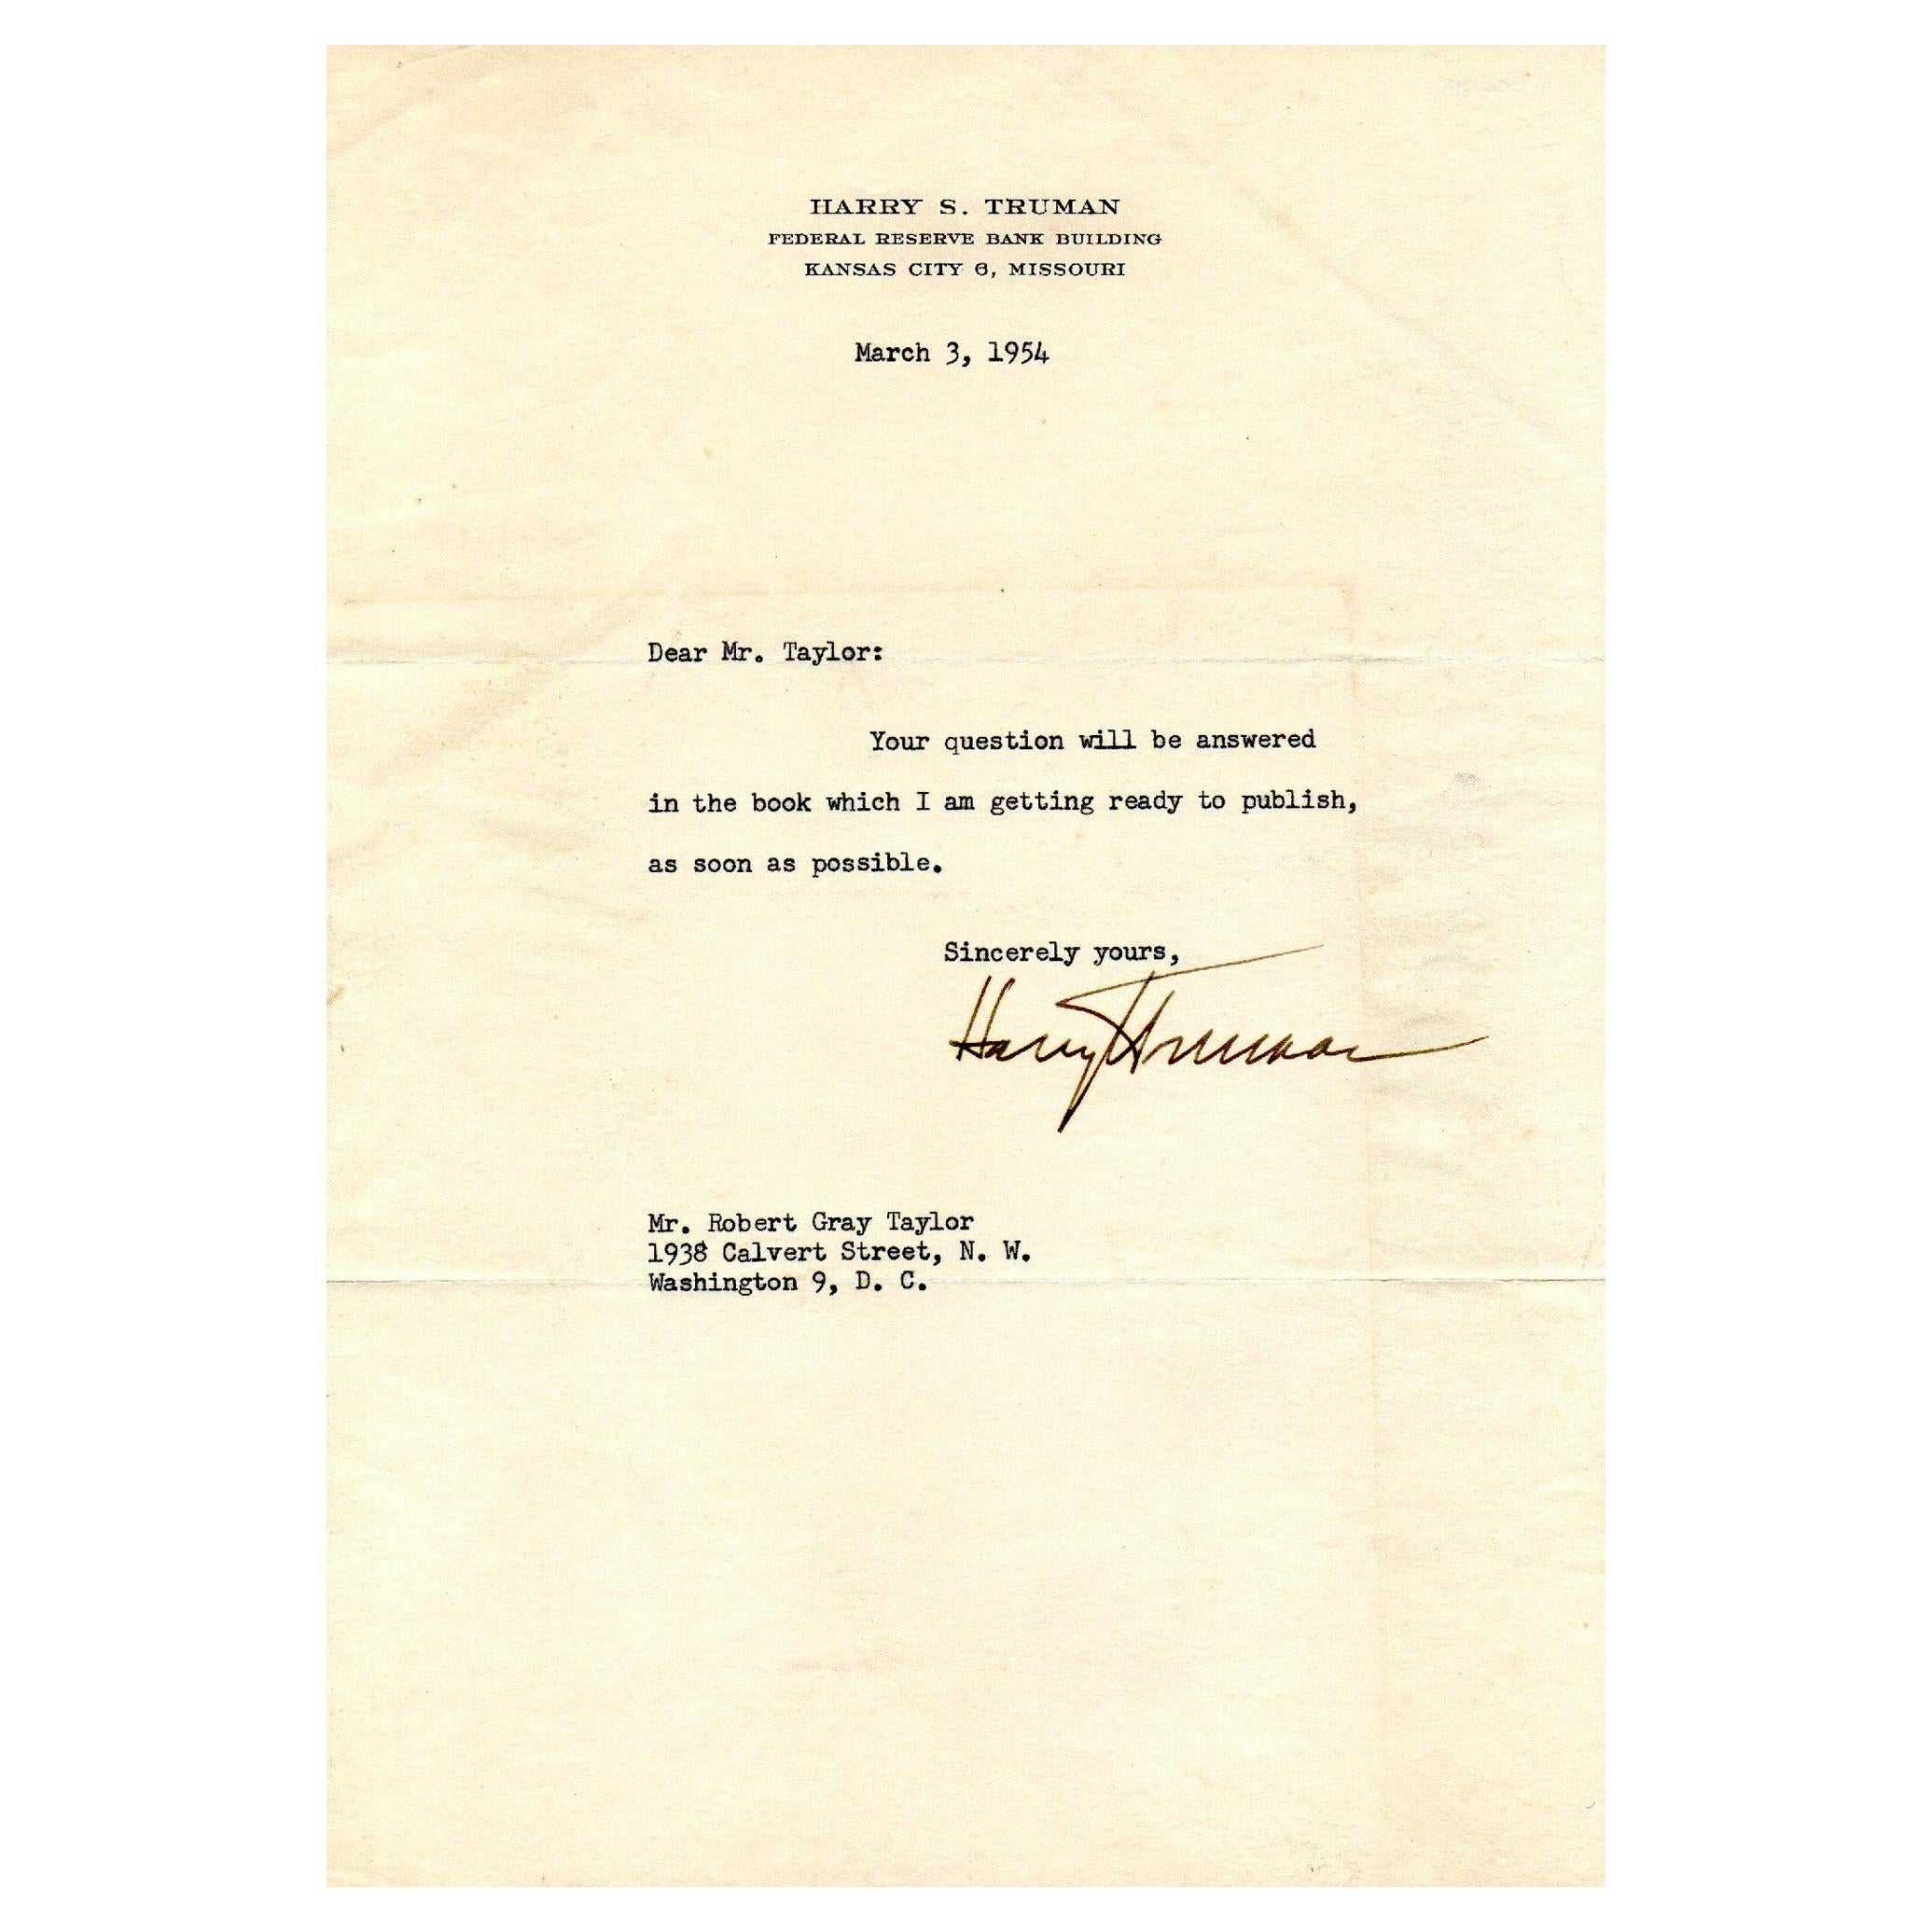 Harry Truman Signed Letter to Robert Gray Taylor, 1954